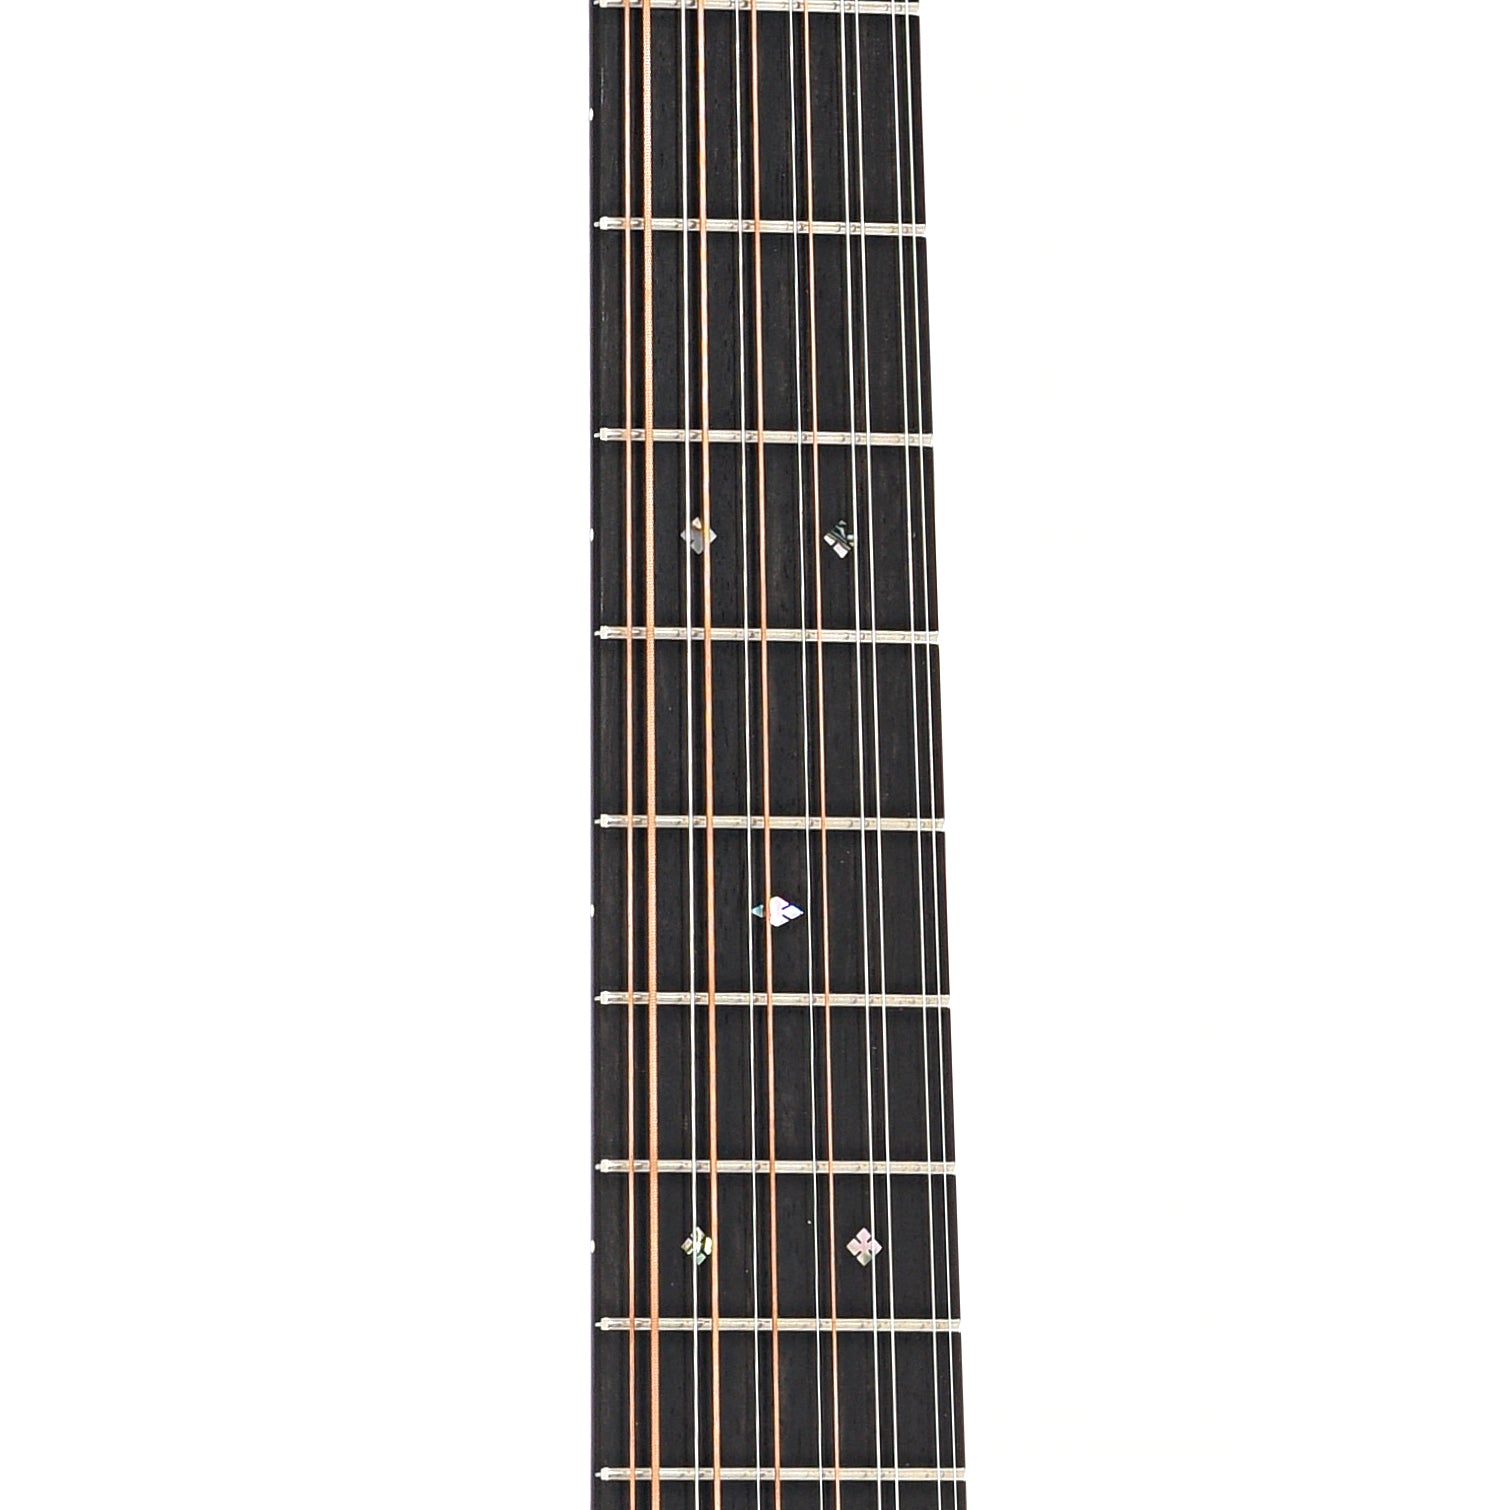 Fretboard of Collings 02H 12-String Guitar